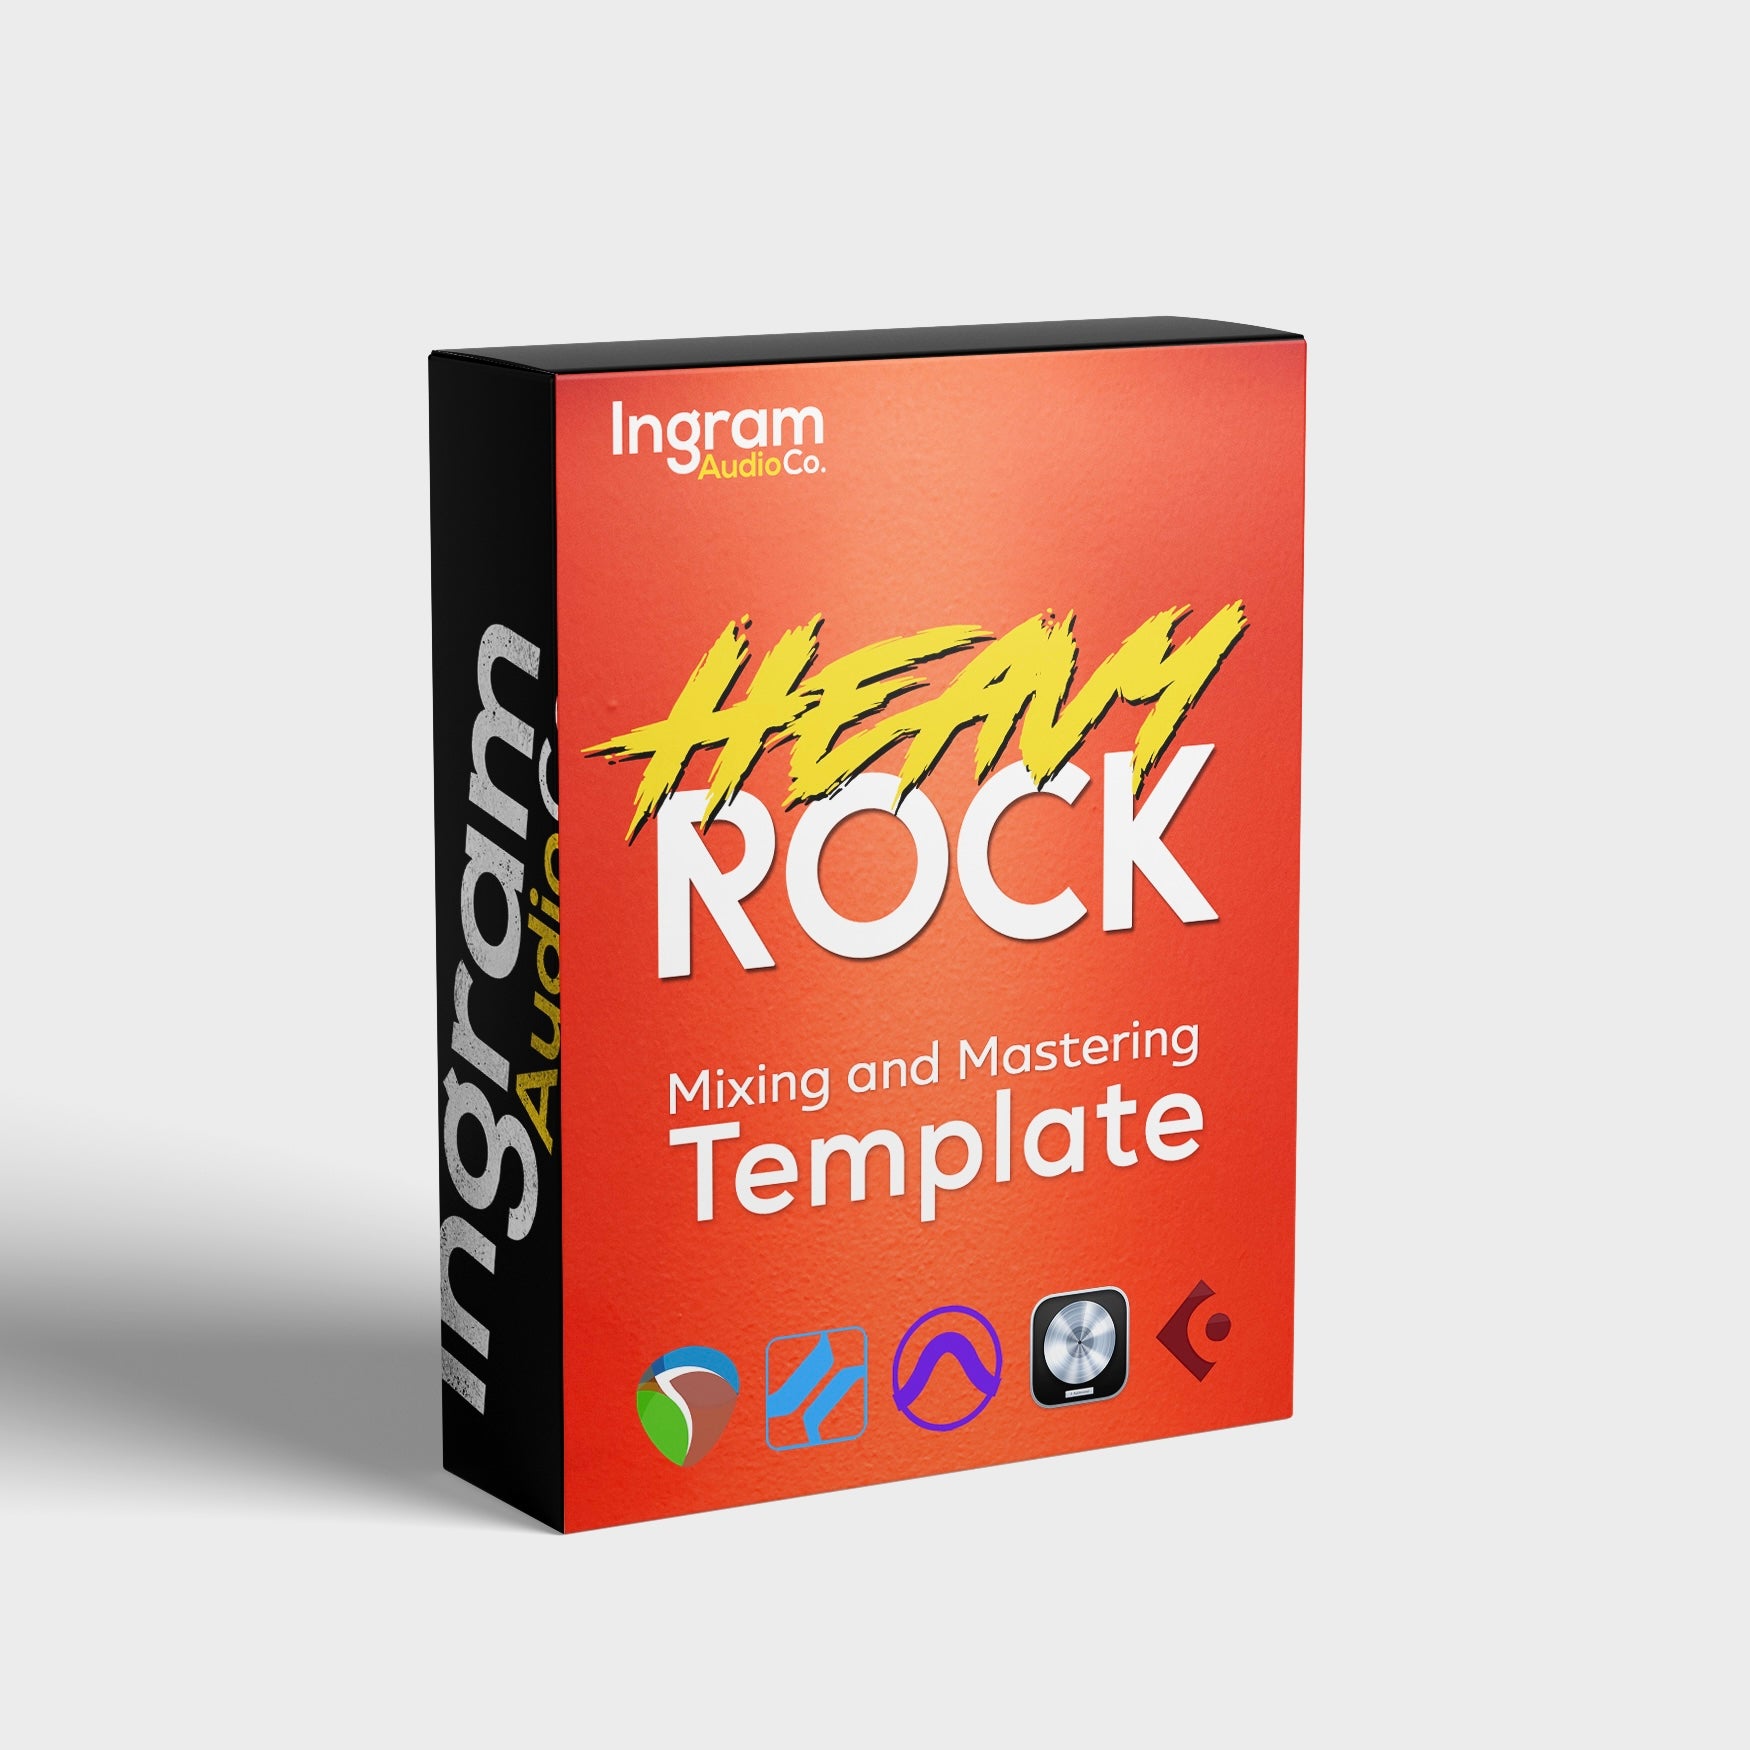 Heavy Rock Mixing and Mastering Template